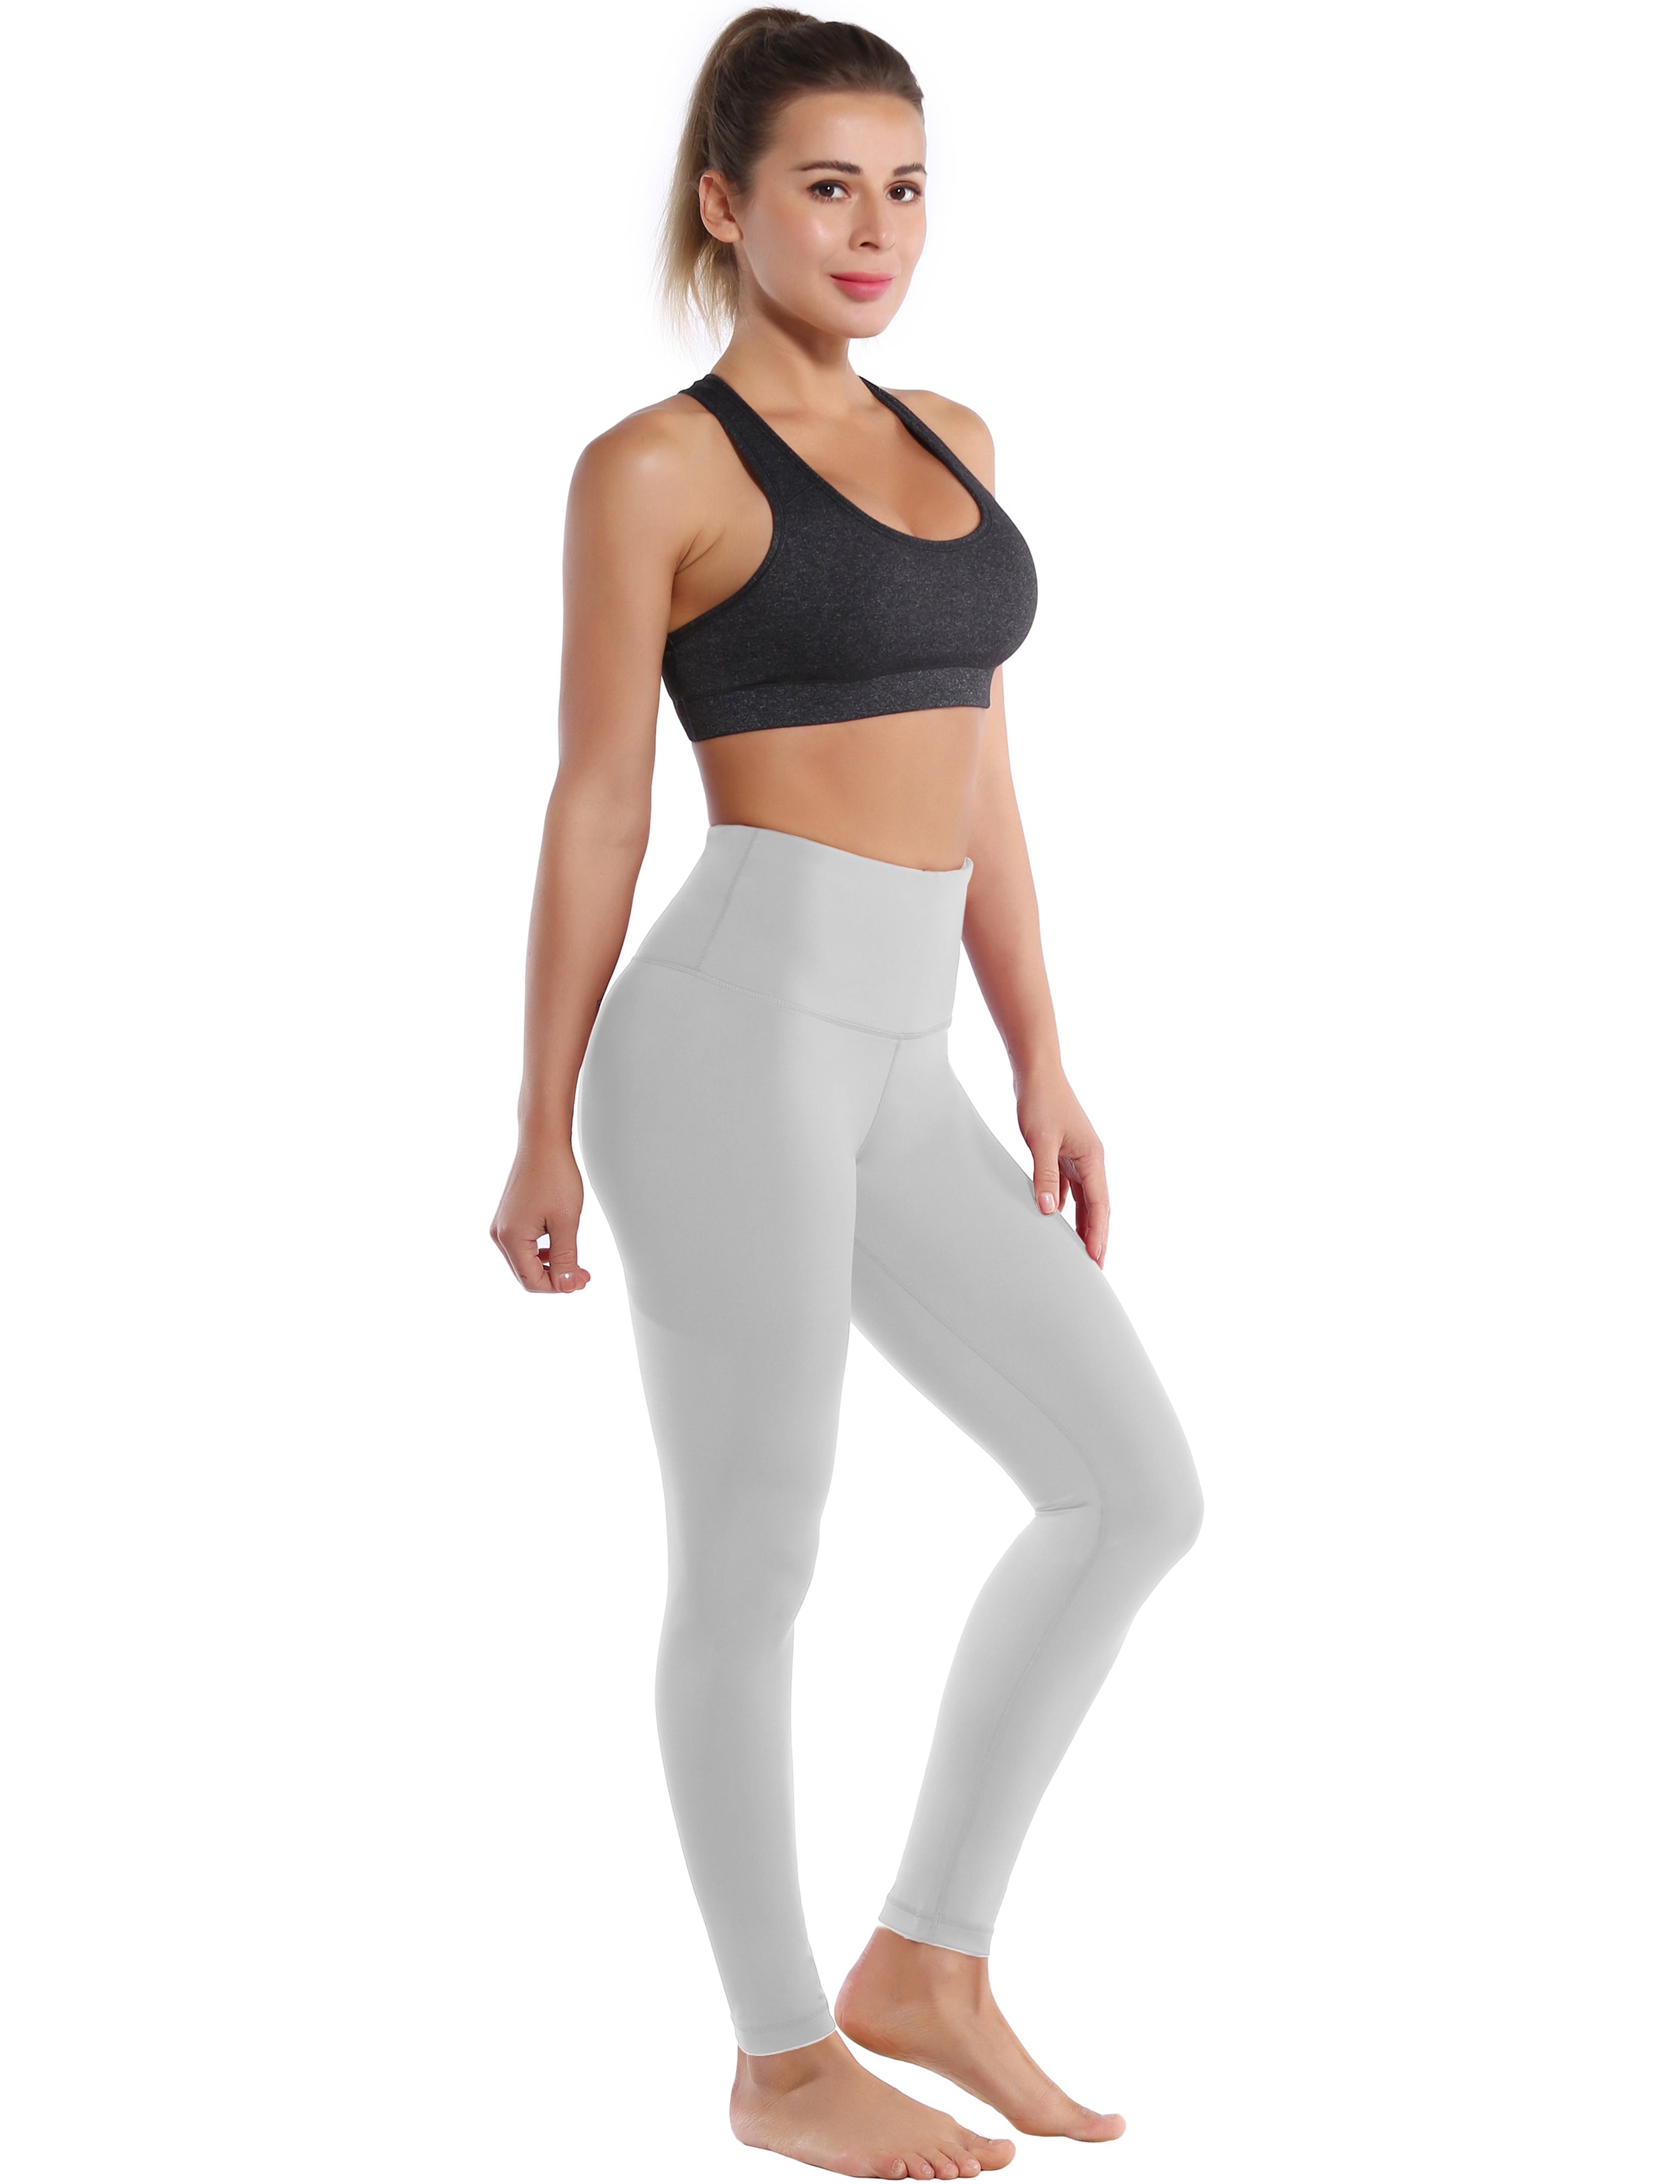 High Waist Biking Pants lightgray 75%Nylon/25%Spandex Fabric doesn't attract lint easily 4-way stretch No see-through Moisture-wicking Tummy control Inner pocket Four lengths